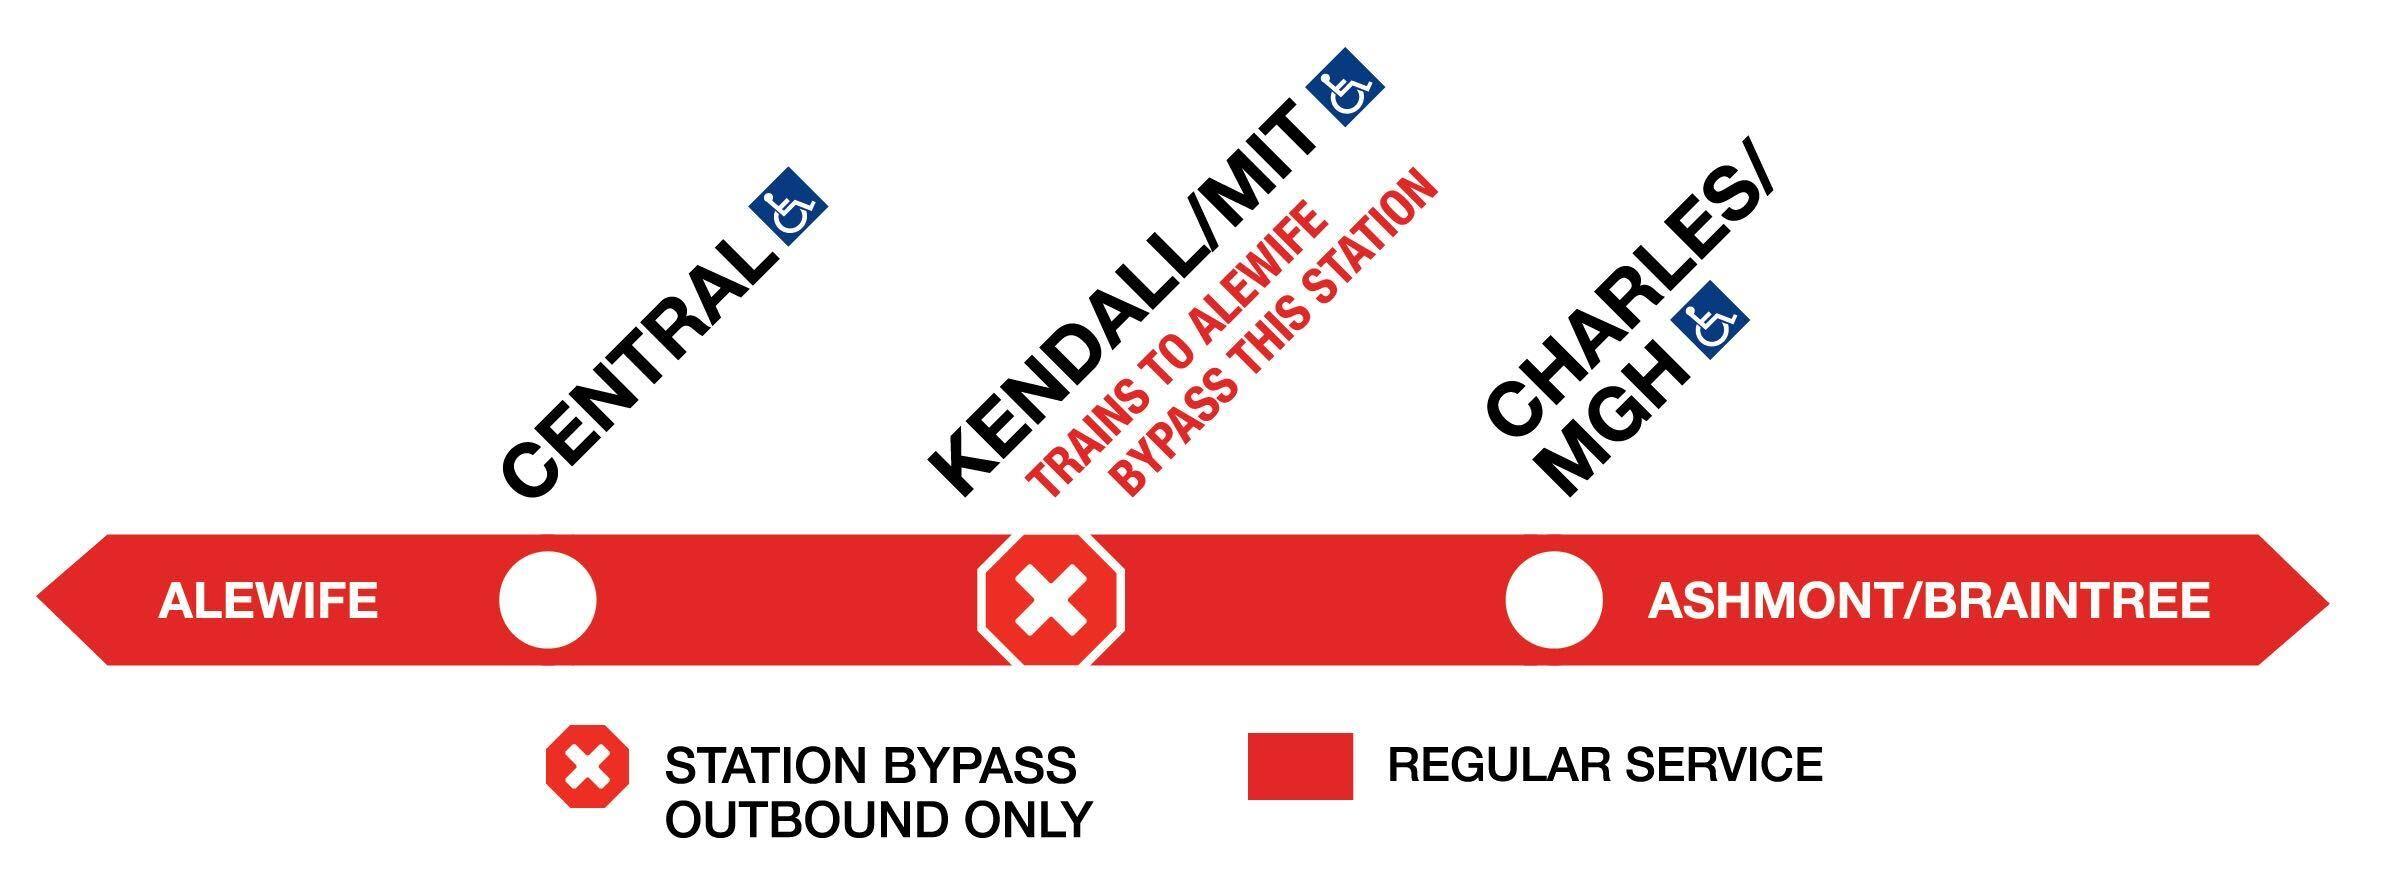 Graphic for Kendall/MIT station bypass.